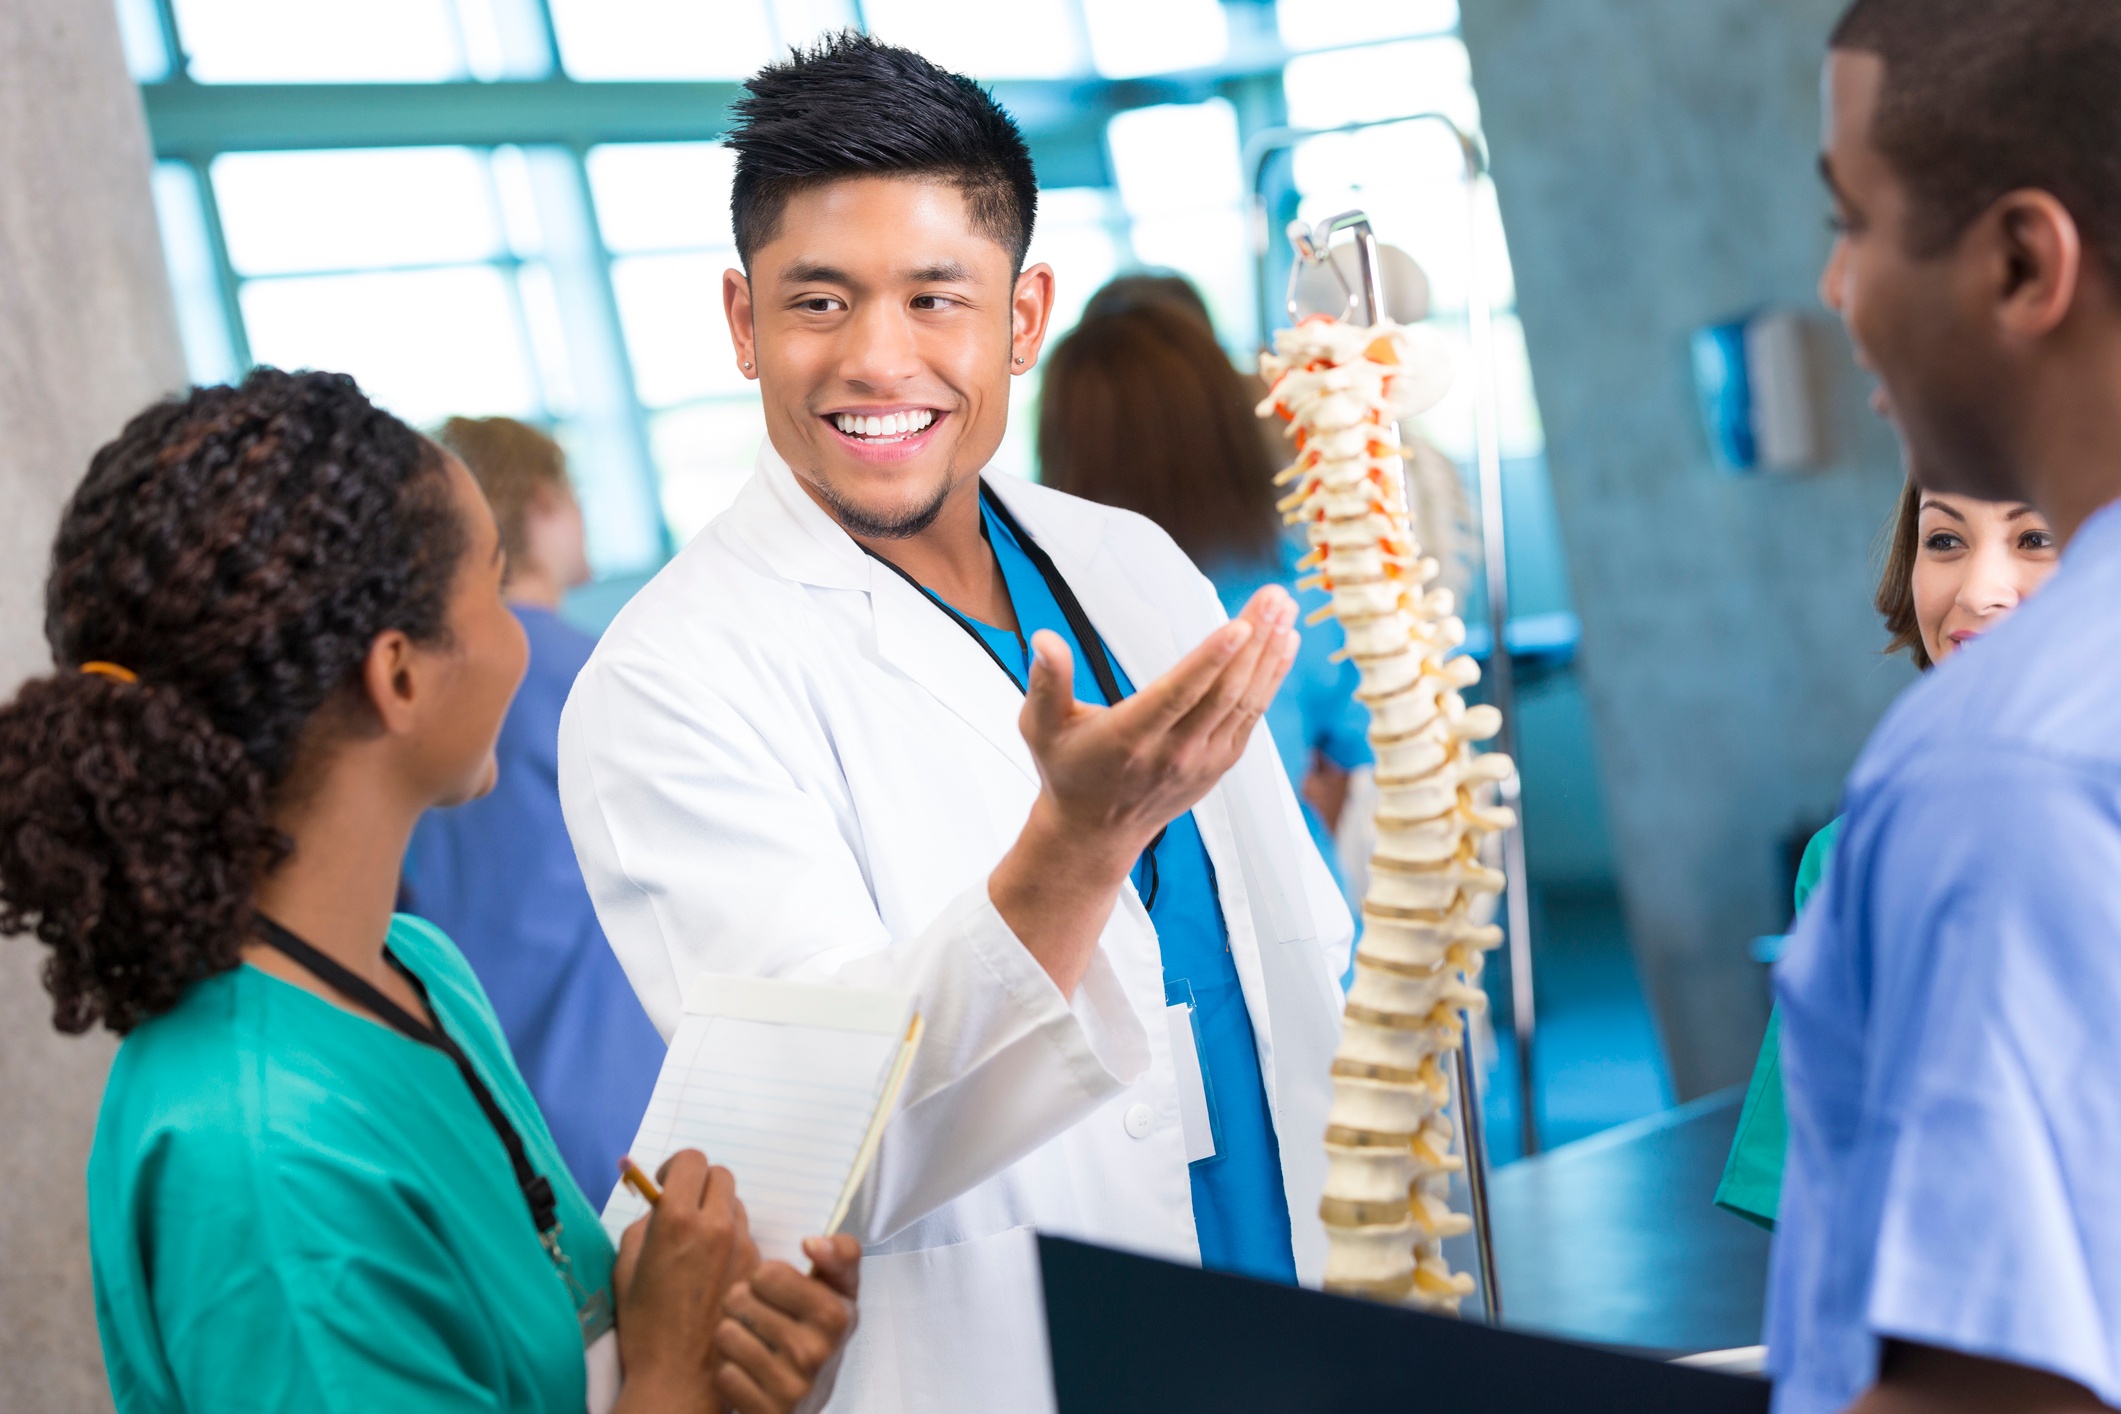 5 Questions to Ask Before Selecting a Doctor of Chiropractic Program-1.jpg